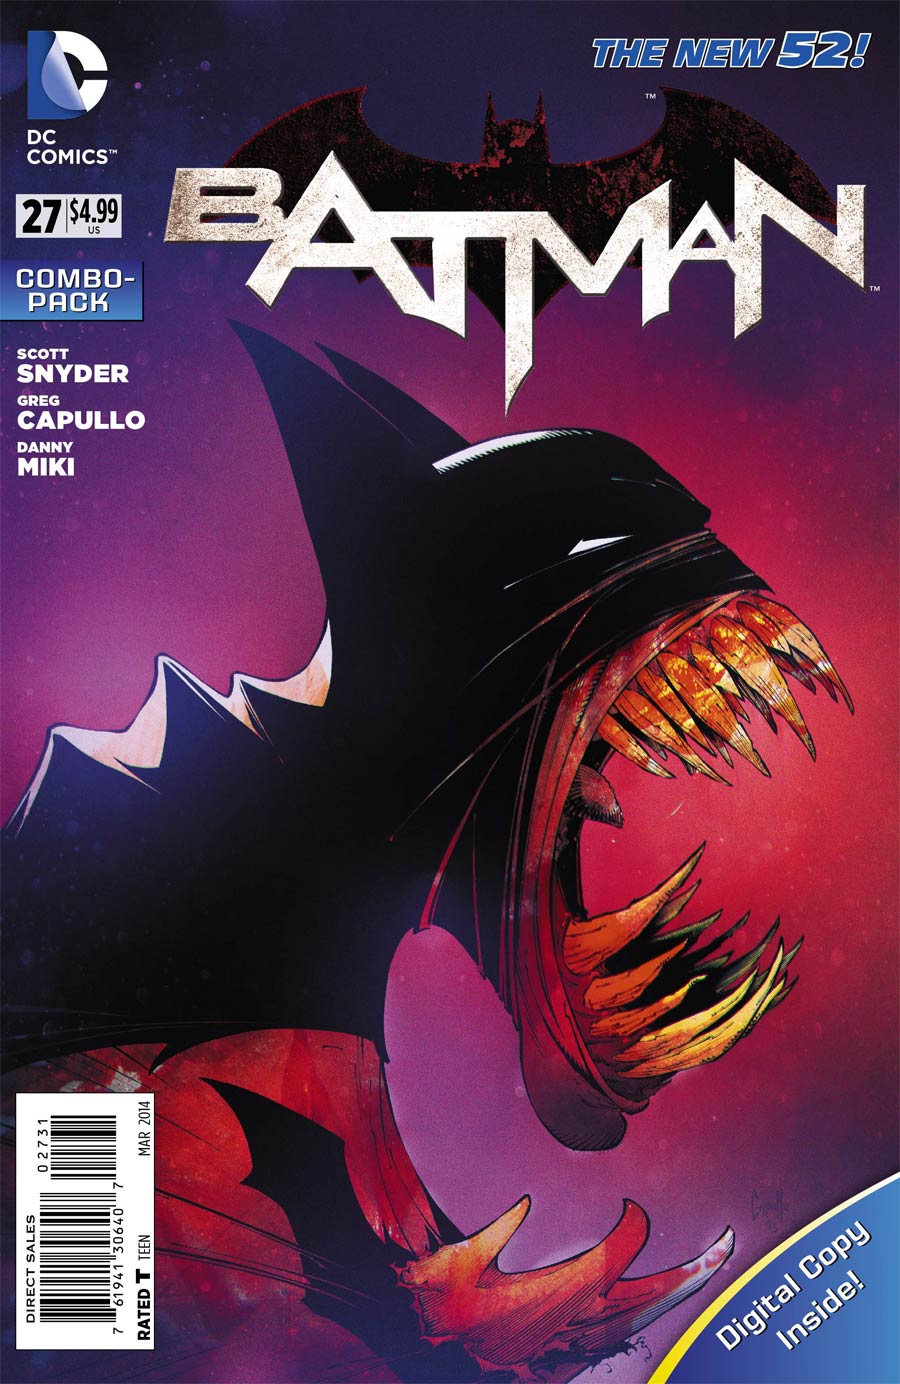 Batman Vol 2 #27 Cover C Combo Pack Without Polybag (Zero Year Tie-In)